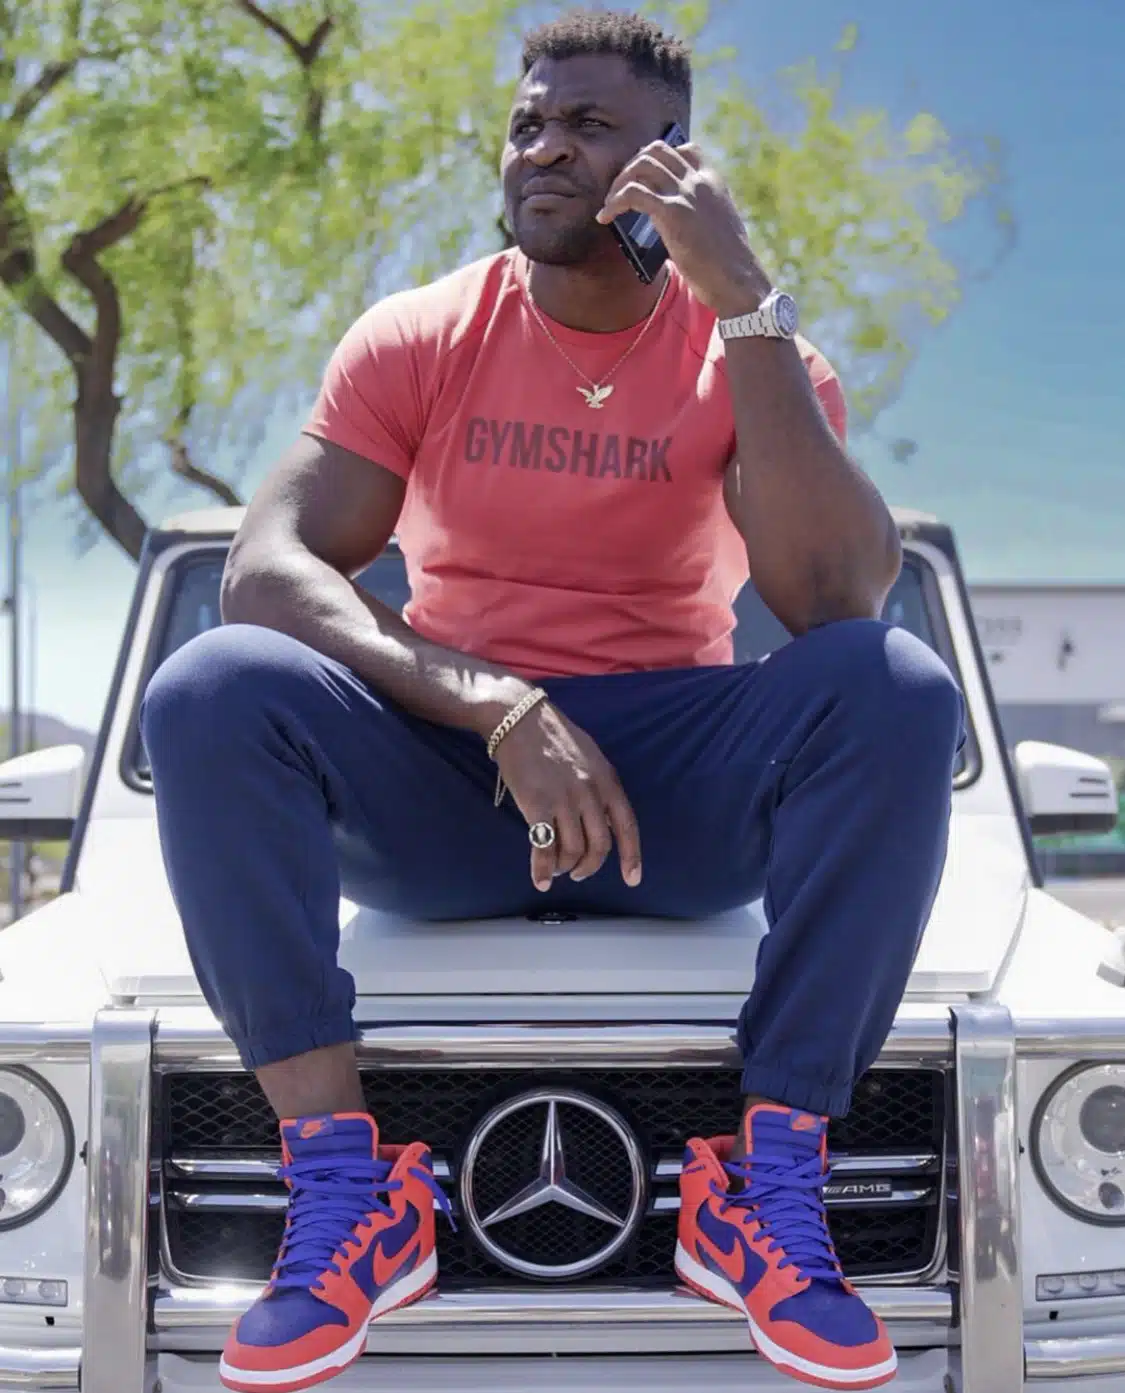 How Francis Ngannou went from homeless to UFC star in Vegas